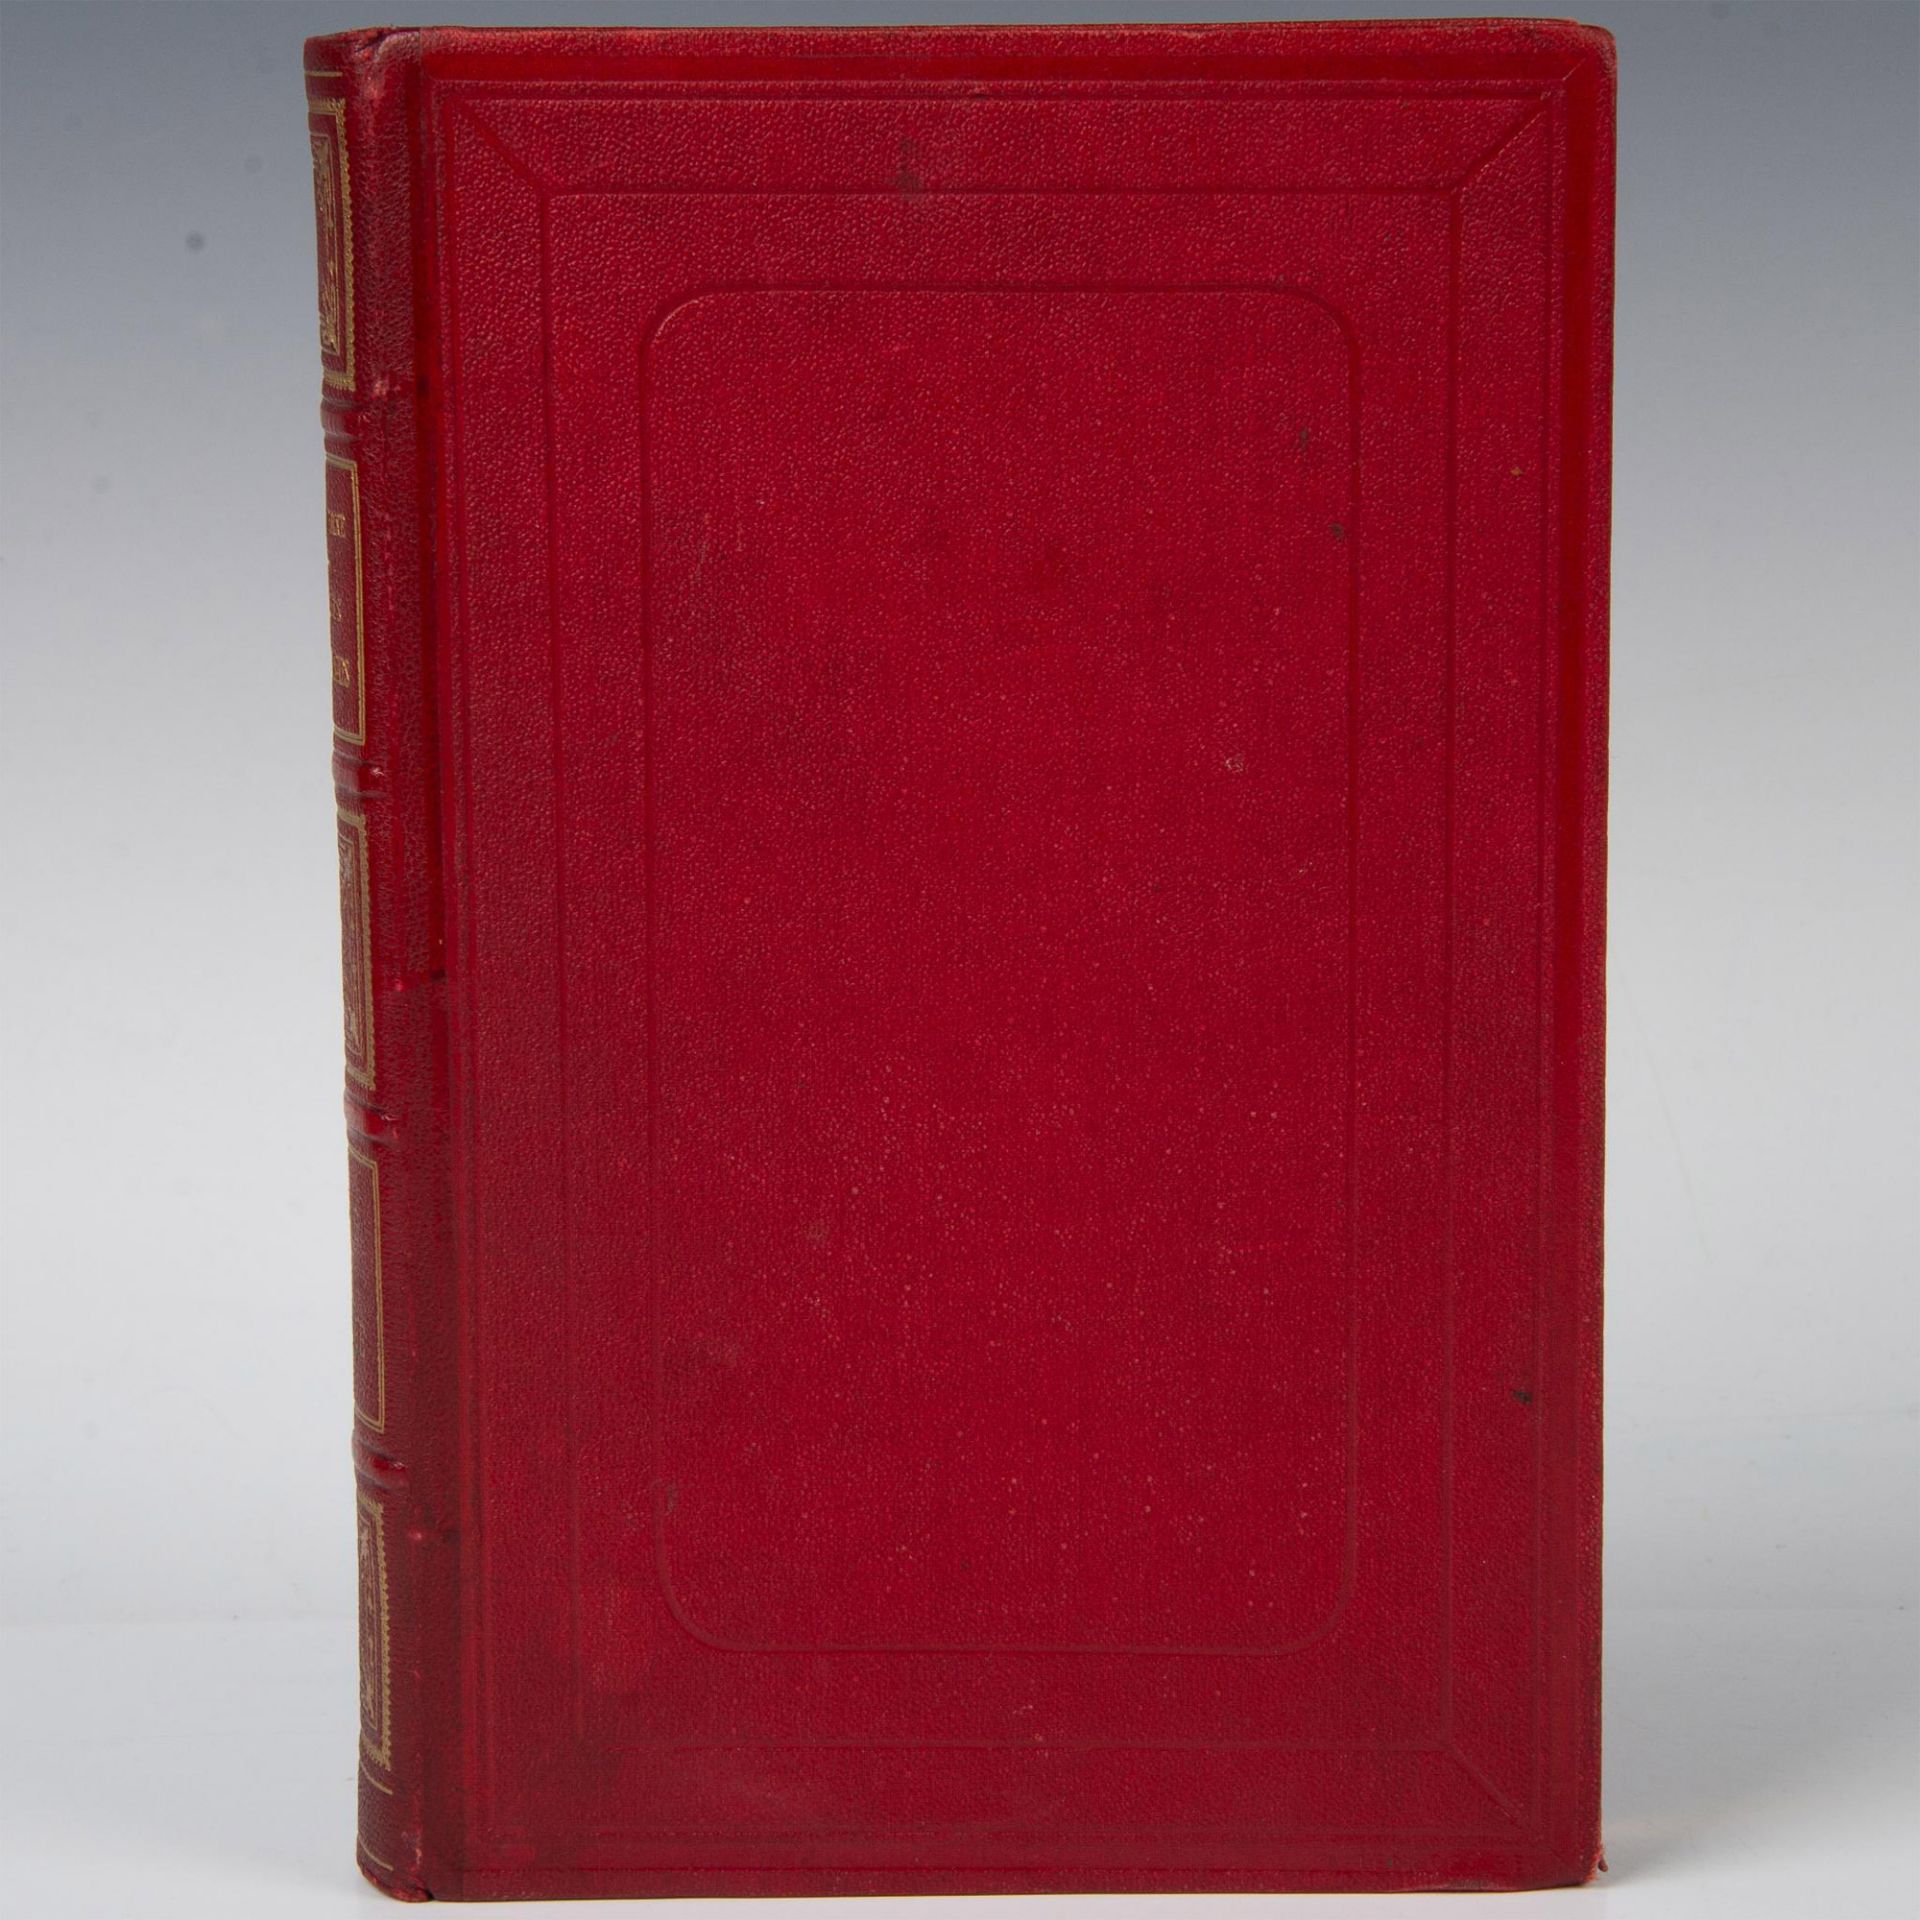 Jules Verne, L'Ile a L'Helice, Aux Harpons, Red Cover - Image 2 of 6